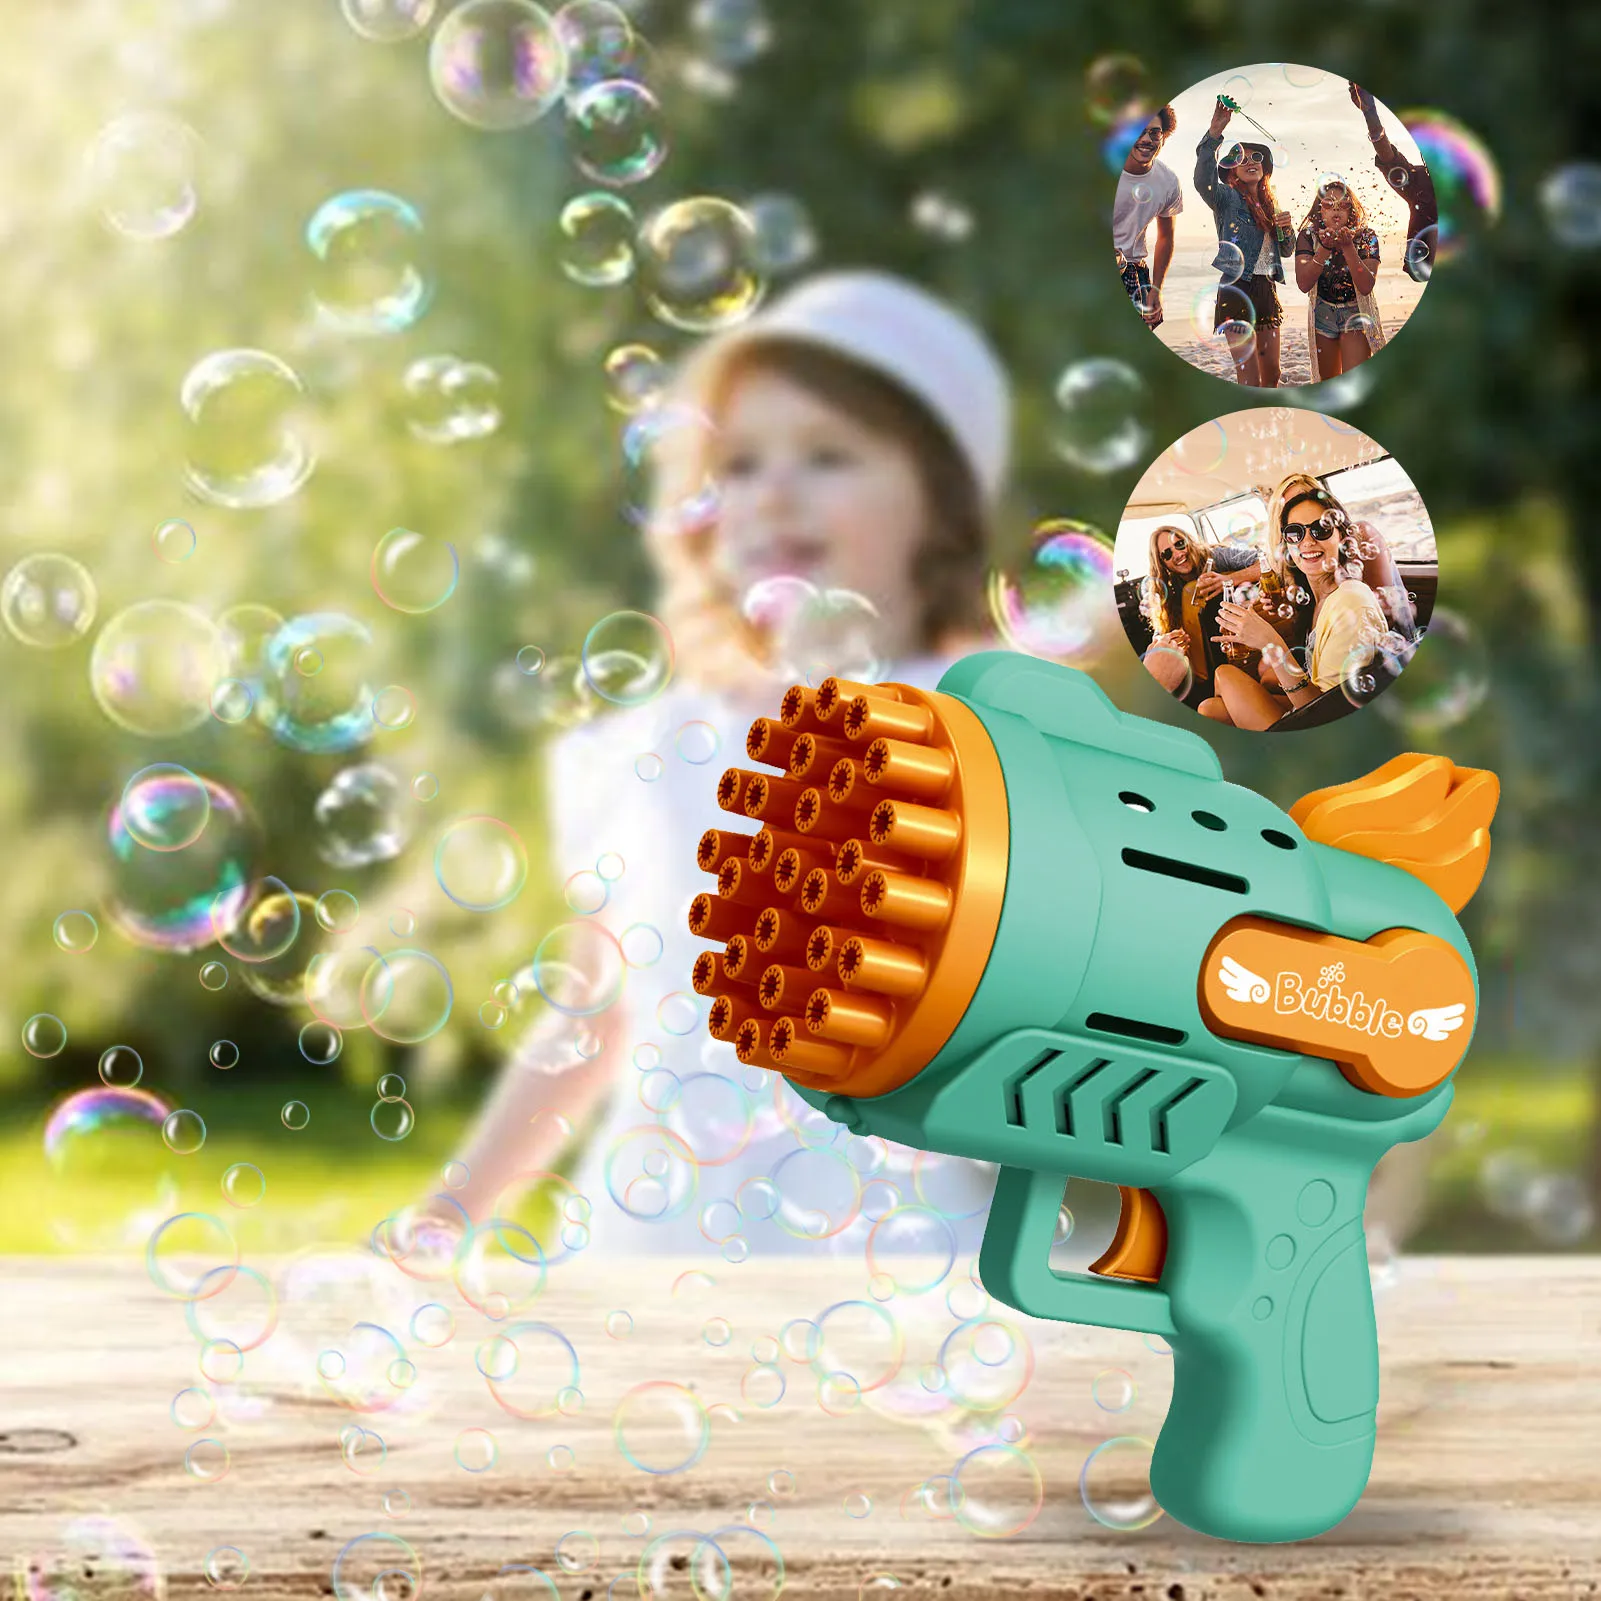 Bubble Gun Rocket 29 Hole Automatic Soap Bubbles Machine Outdoor Toy for Boys Birthday Gifts Wedding Party Children Summer Gift bubble gun 32 hole soap bubble machine electric blower astronaut blow bubblestoy outdoor wedding party supplies children s gifts